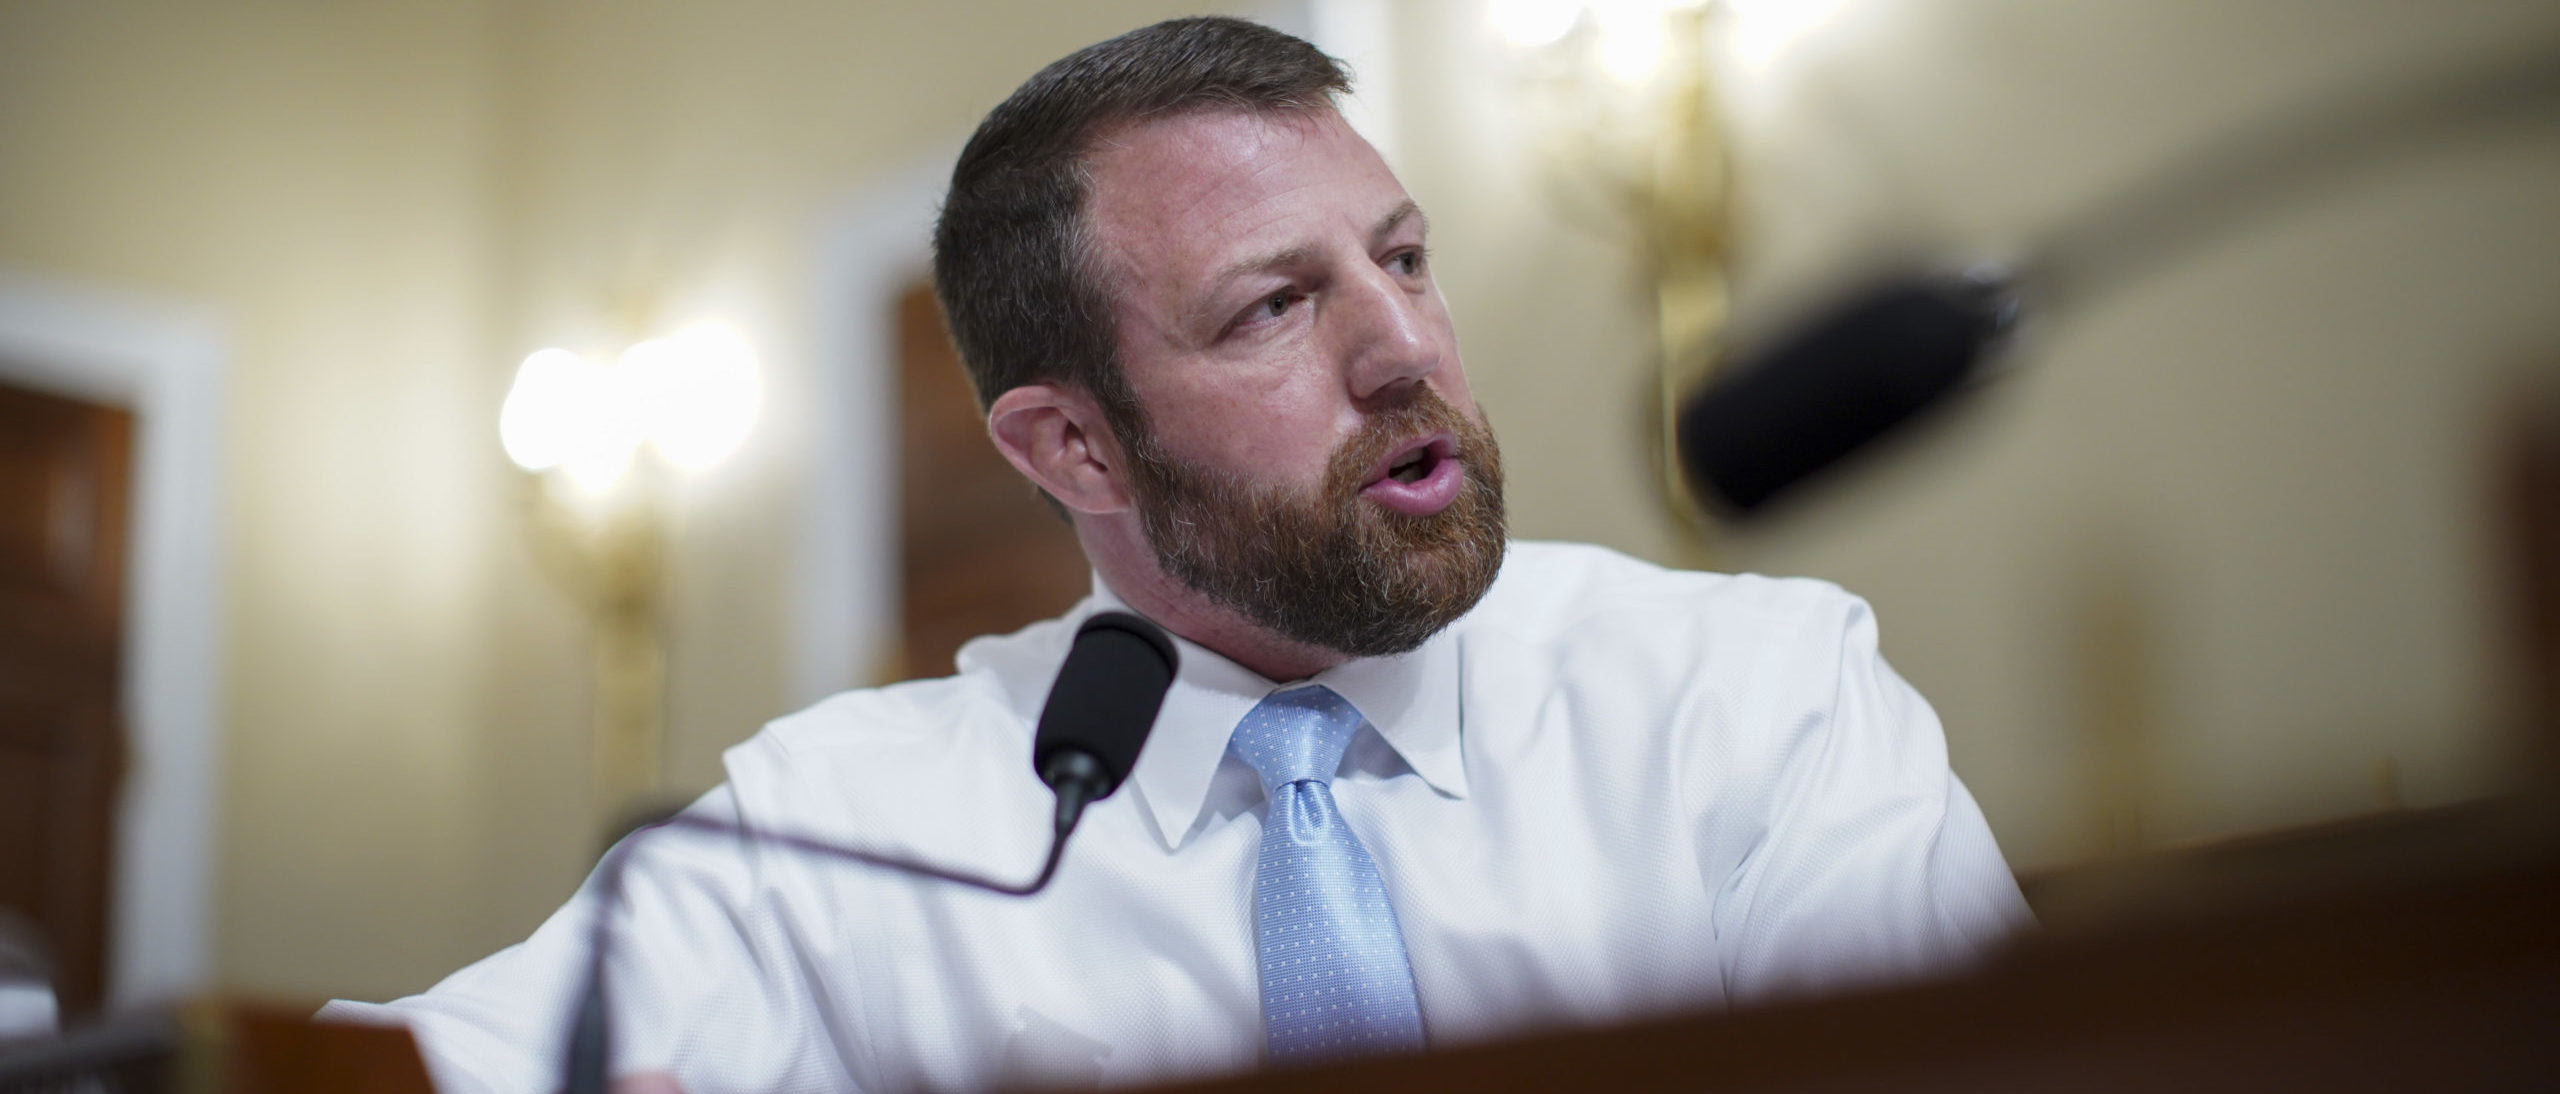 ‘They Tried To Kill Me’: Rep. Markwayne Mullin Accuses White House Of Giving His Location To The Taliban